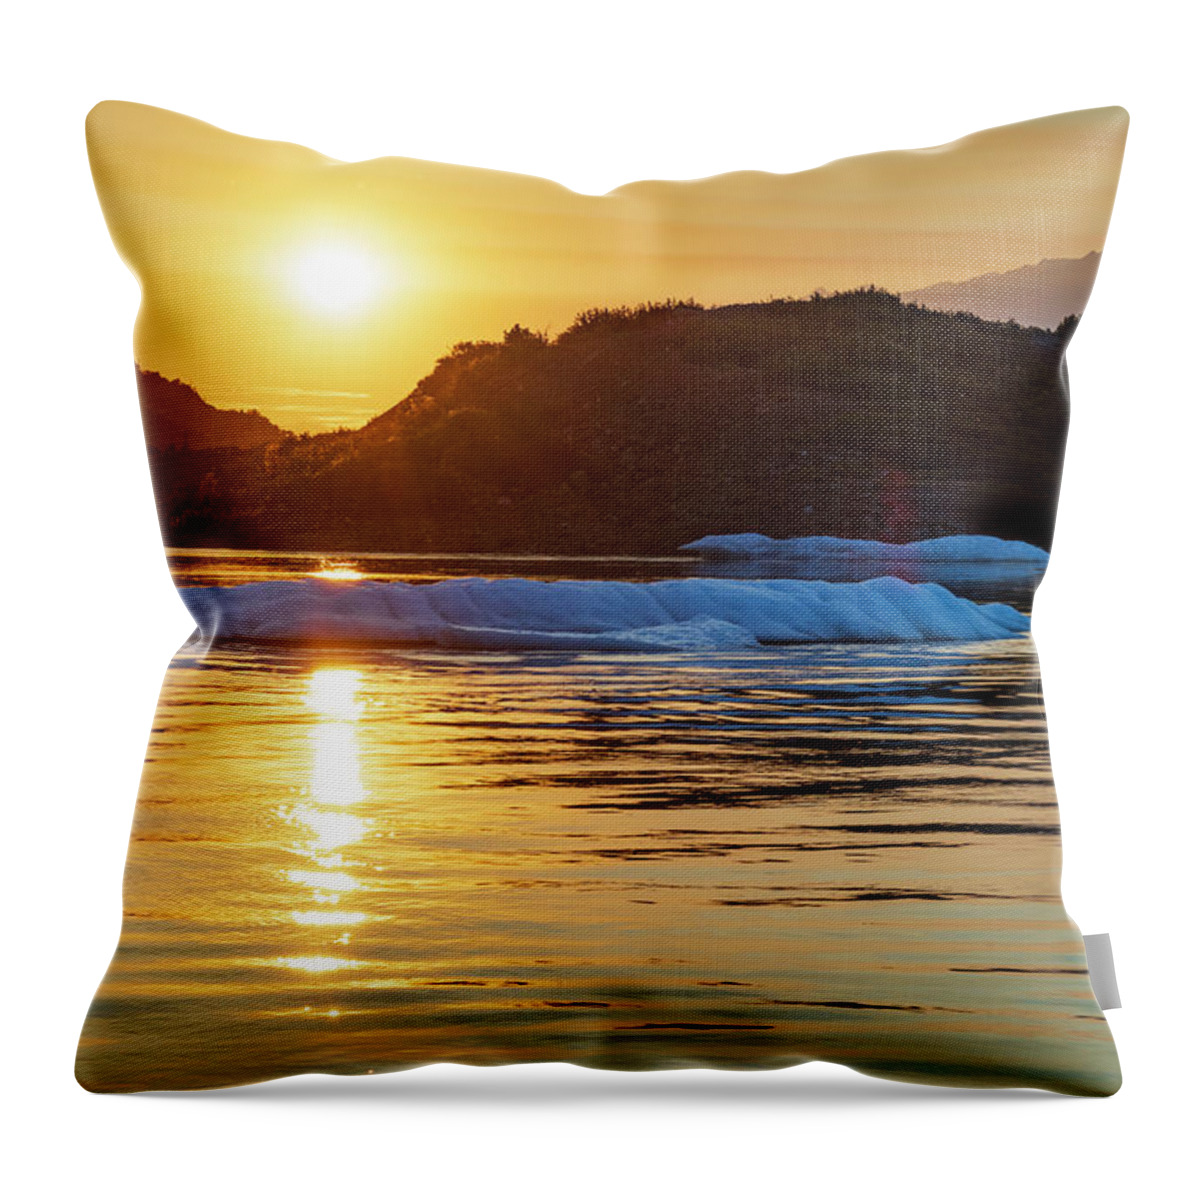 11 Throw Pillow featuring the photograph 11 O'clock by Chad Dutson